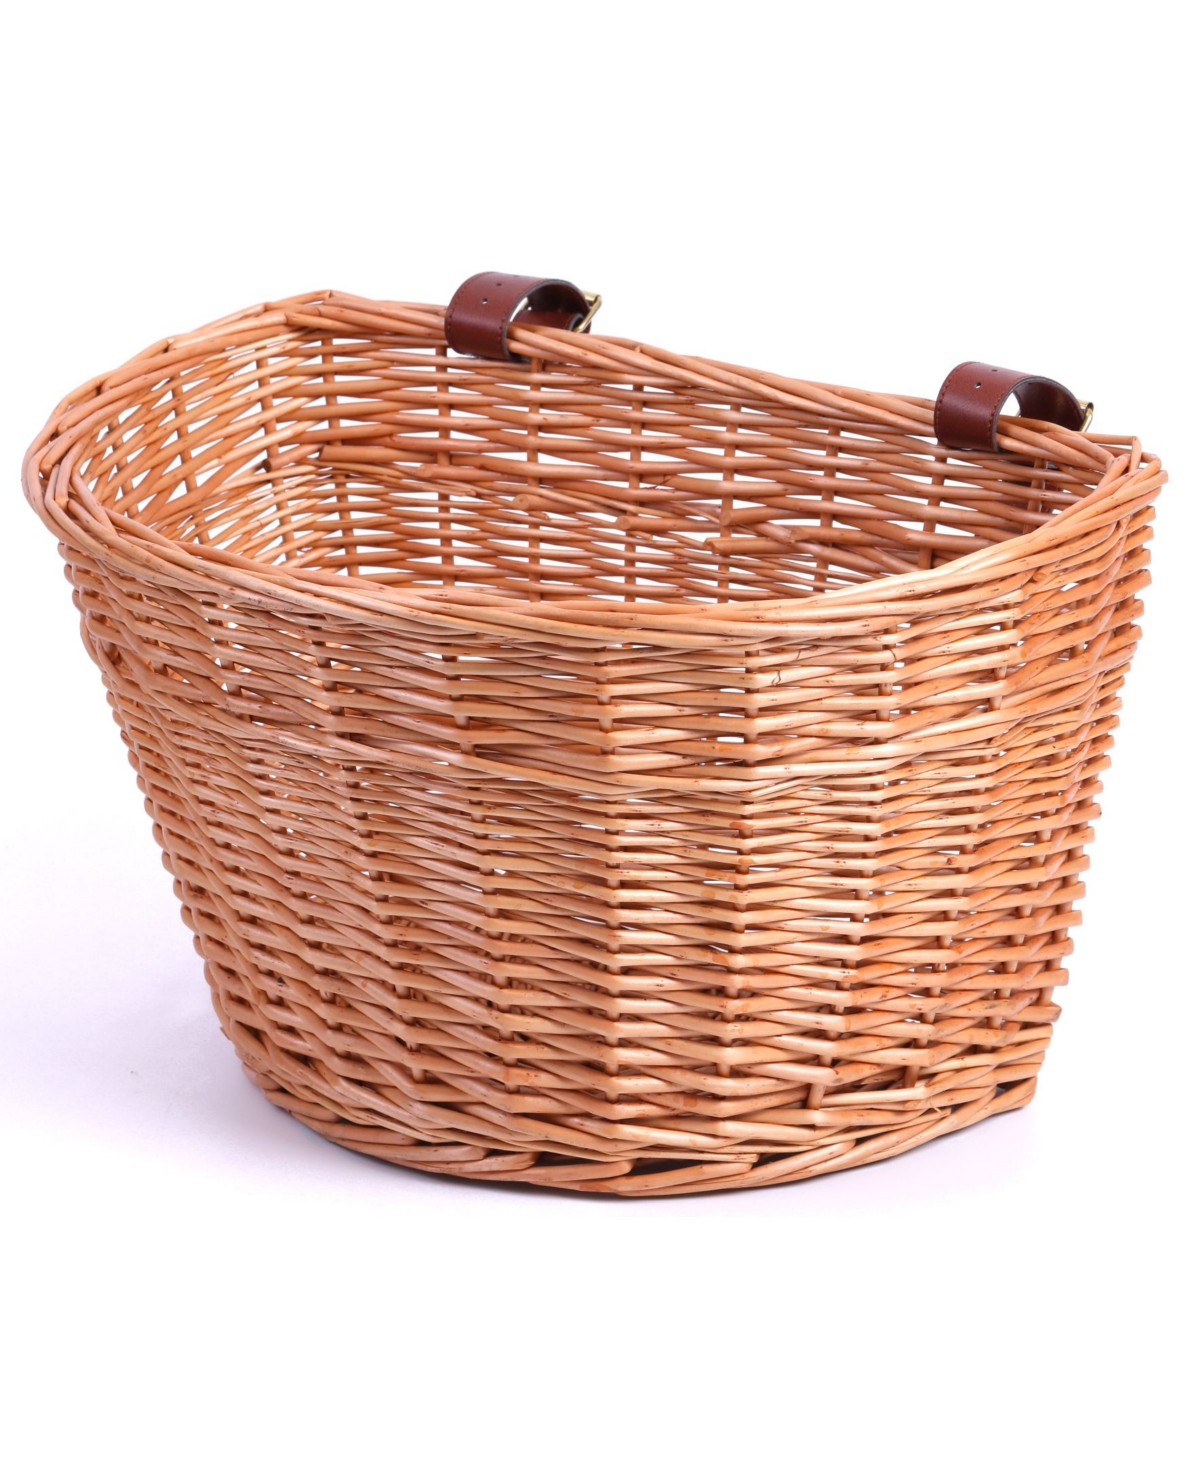 Wicker Front Bike Basket with Faux Leather Straps - Light Brown